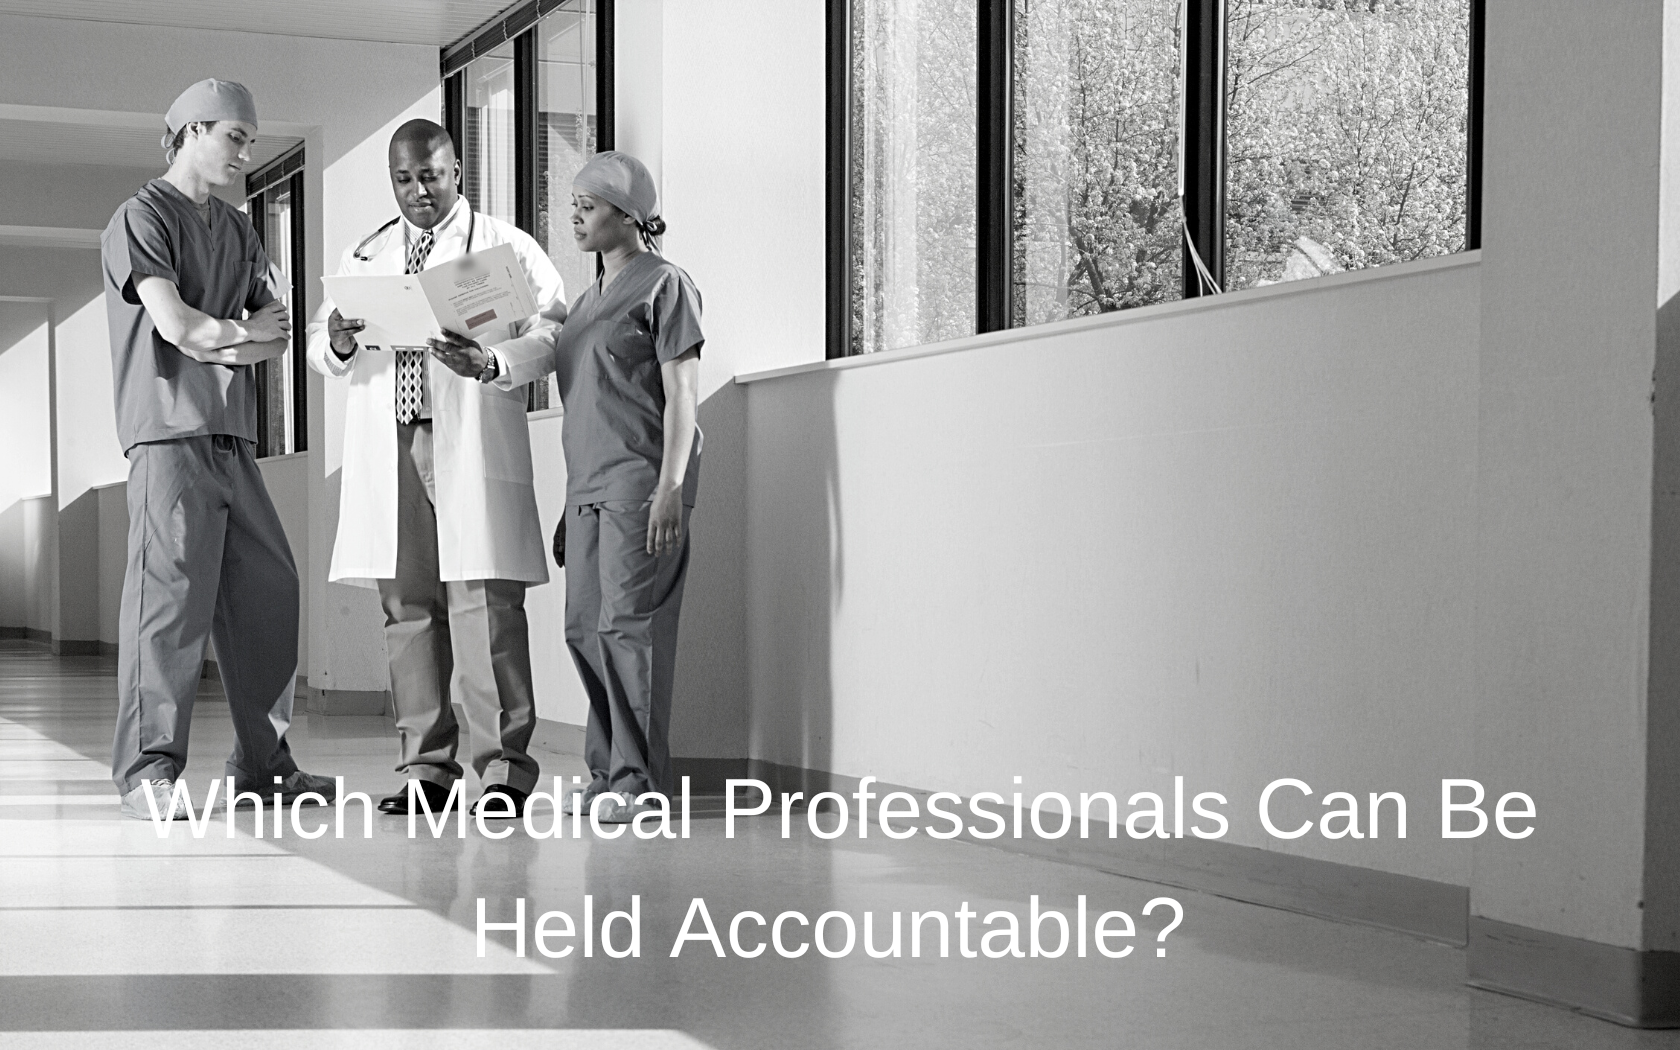 Healthcare professionals determining who was responsible for negligence.